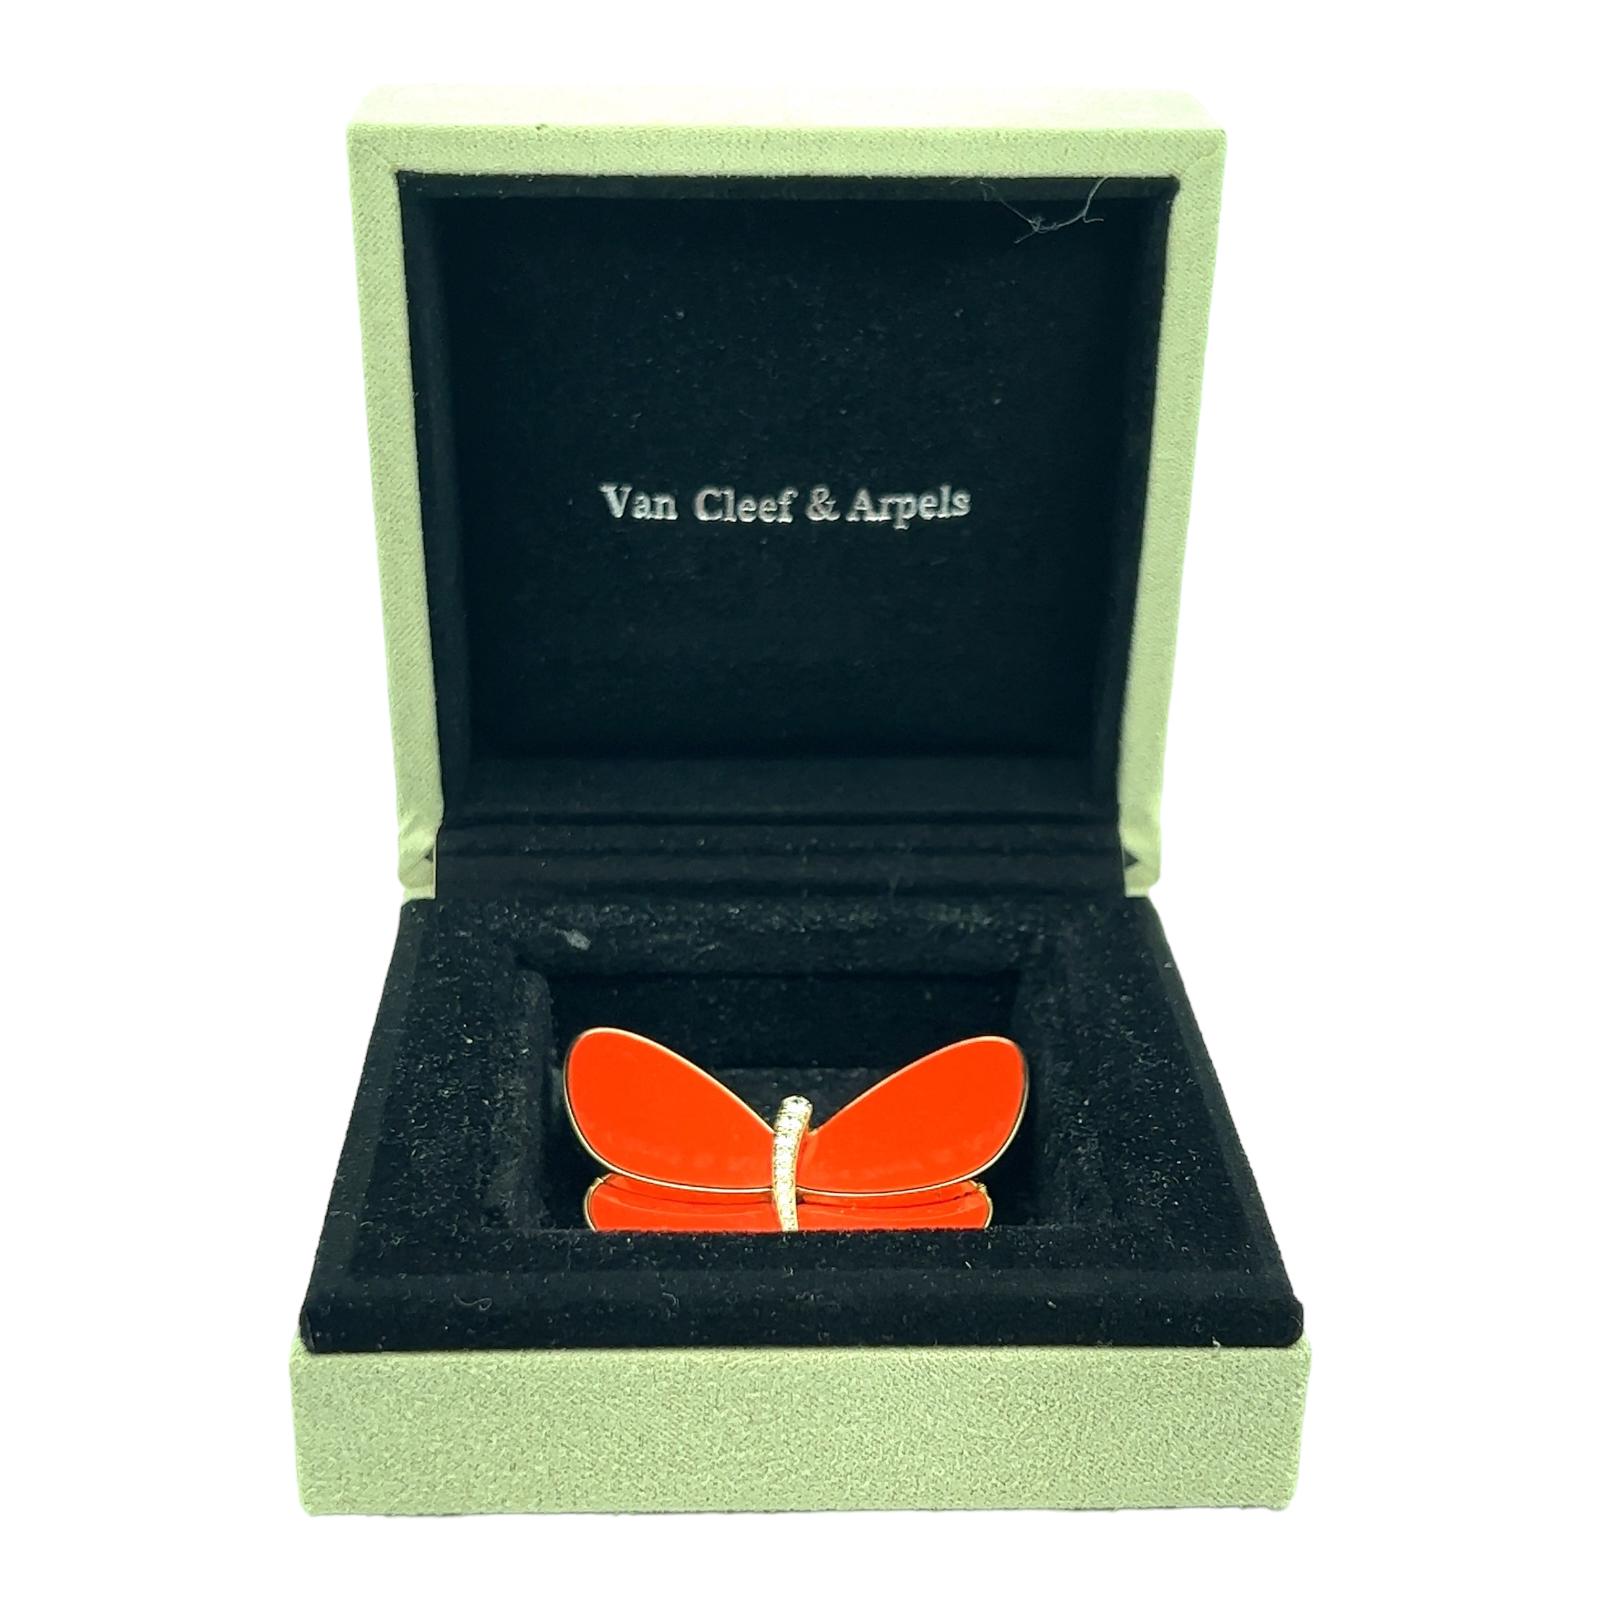 Van Cleef & Arpels popular coral and diamond butterfly clip brooch crafted in 18 karat yellow and white gold. The coral butterfly features 9 round brilliant cut diamonds weighing approximately .30 CTW and graded DE color and VVS clarity. The